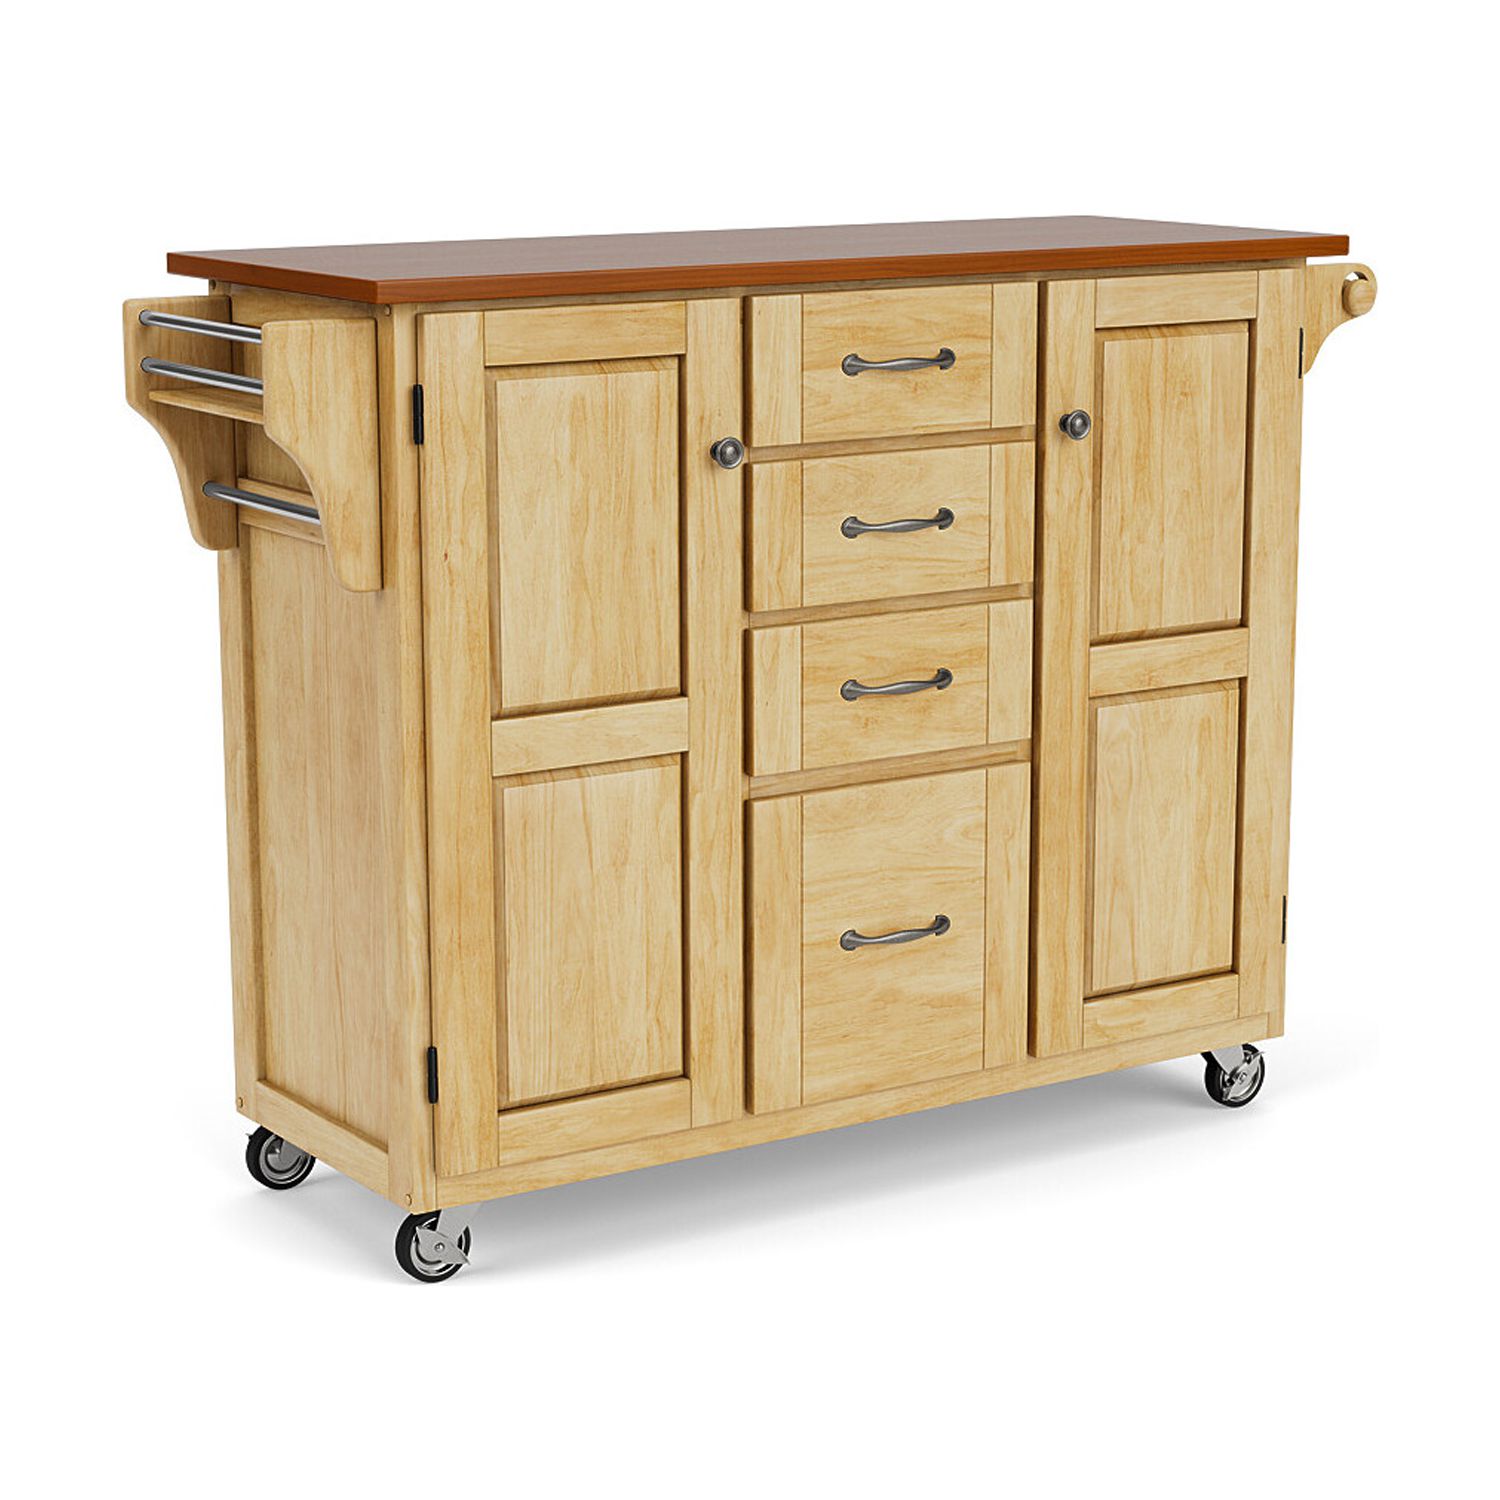 Create-a-Cart Natural Finish with Oak Top - image 1 of 6